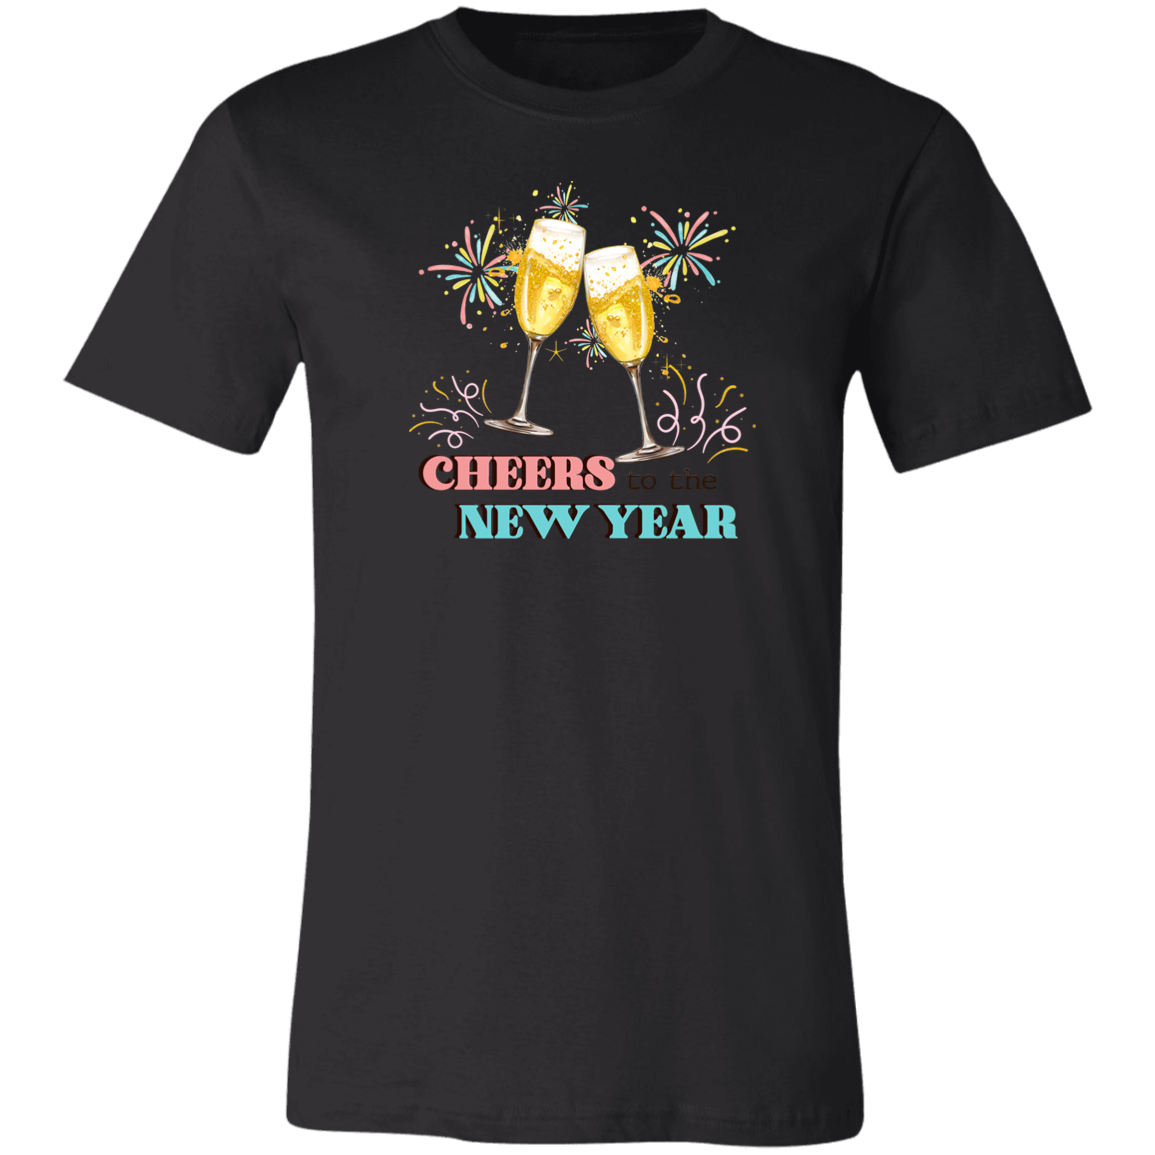 Cheers To The New Year Shirt